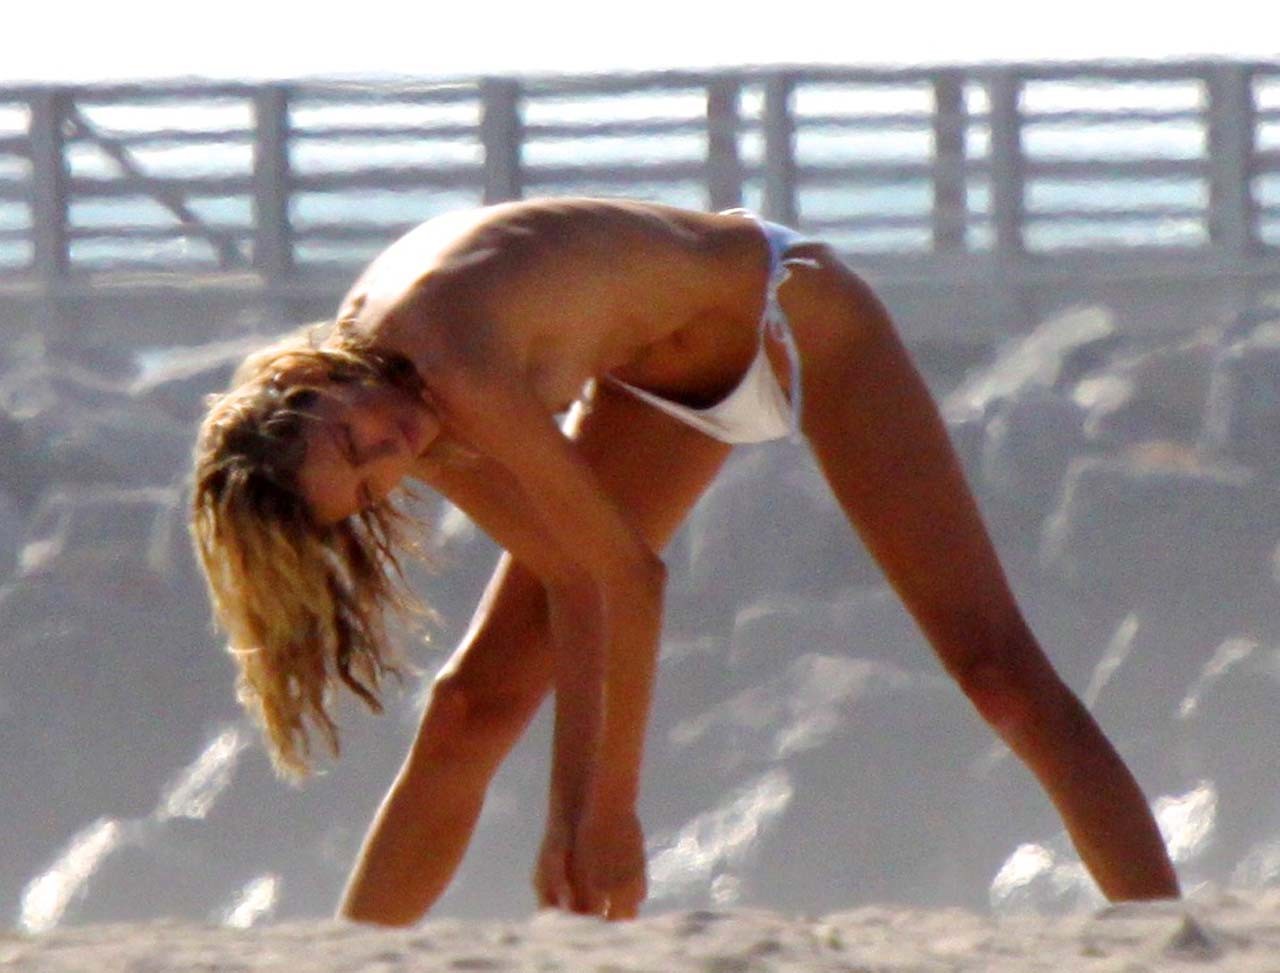 Anja Rubik showing her nice tits on photoshoot paparazzi pictures and on stage #75318539